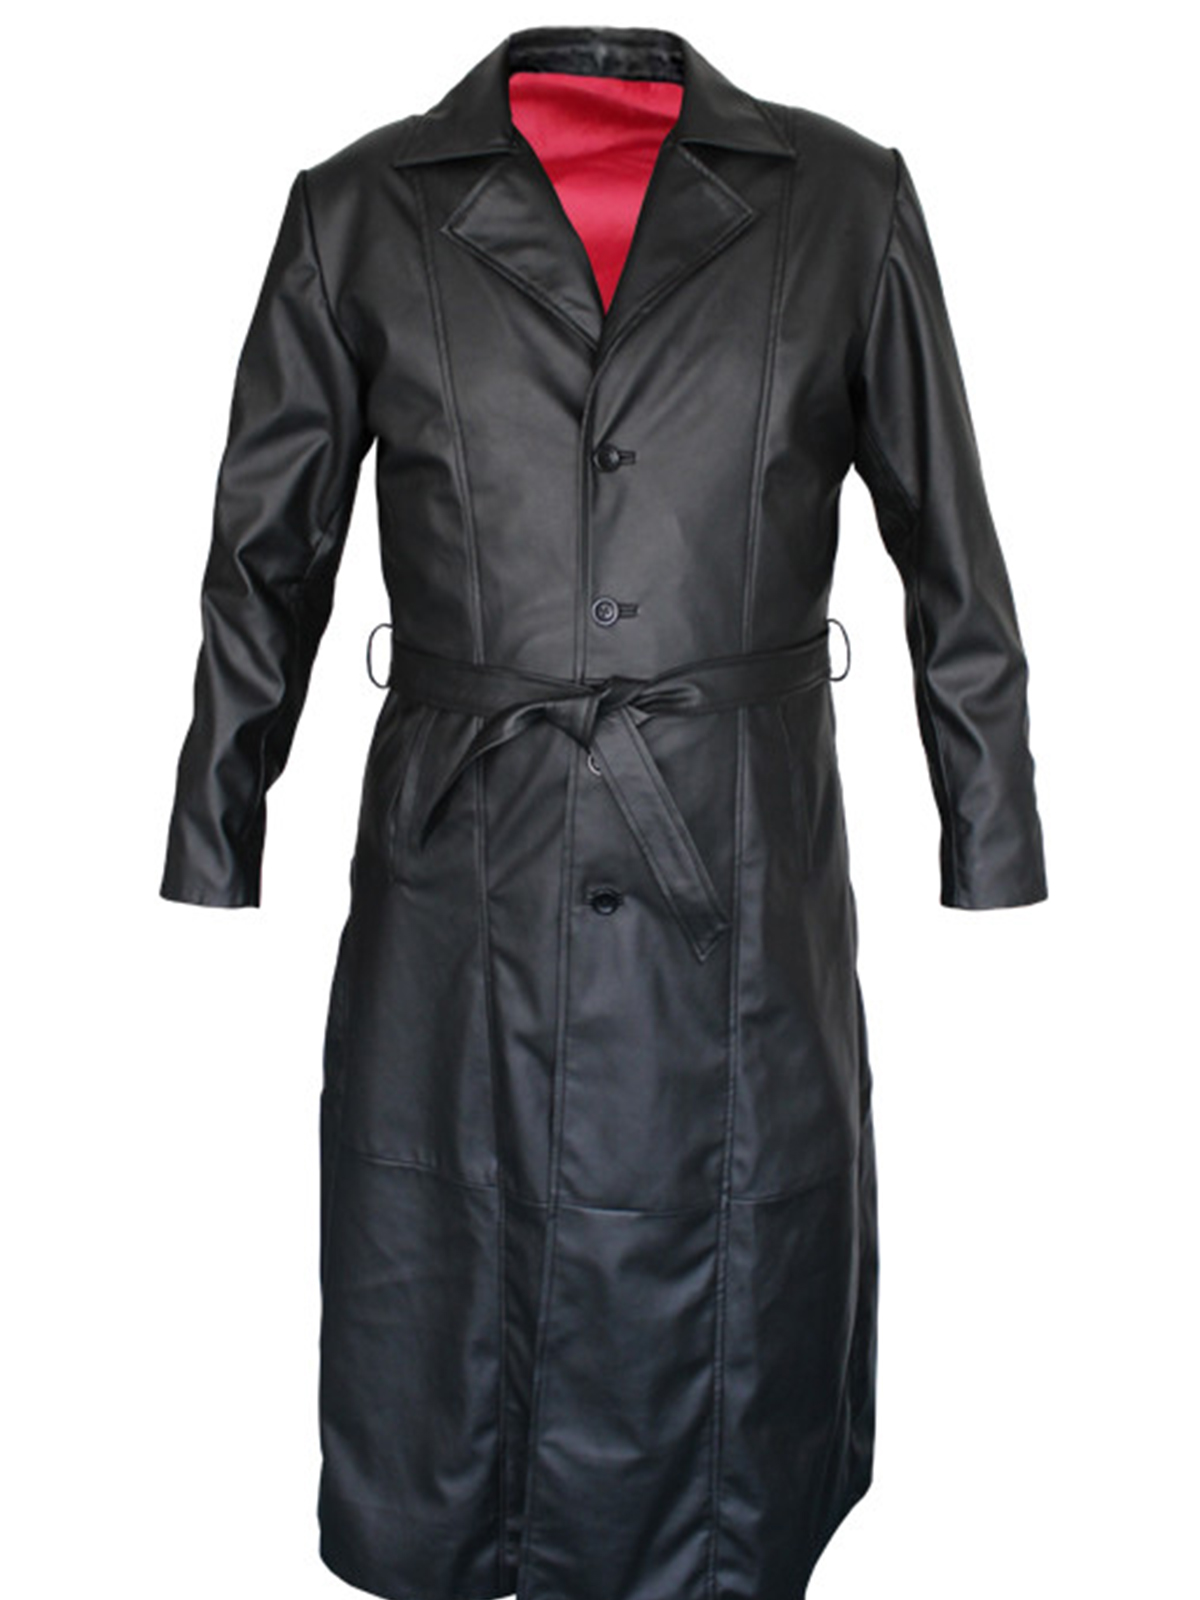 Blade Wesley Snipes Trench Black Leather Coat - Stars Jackets